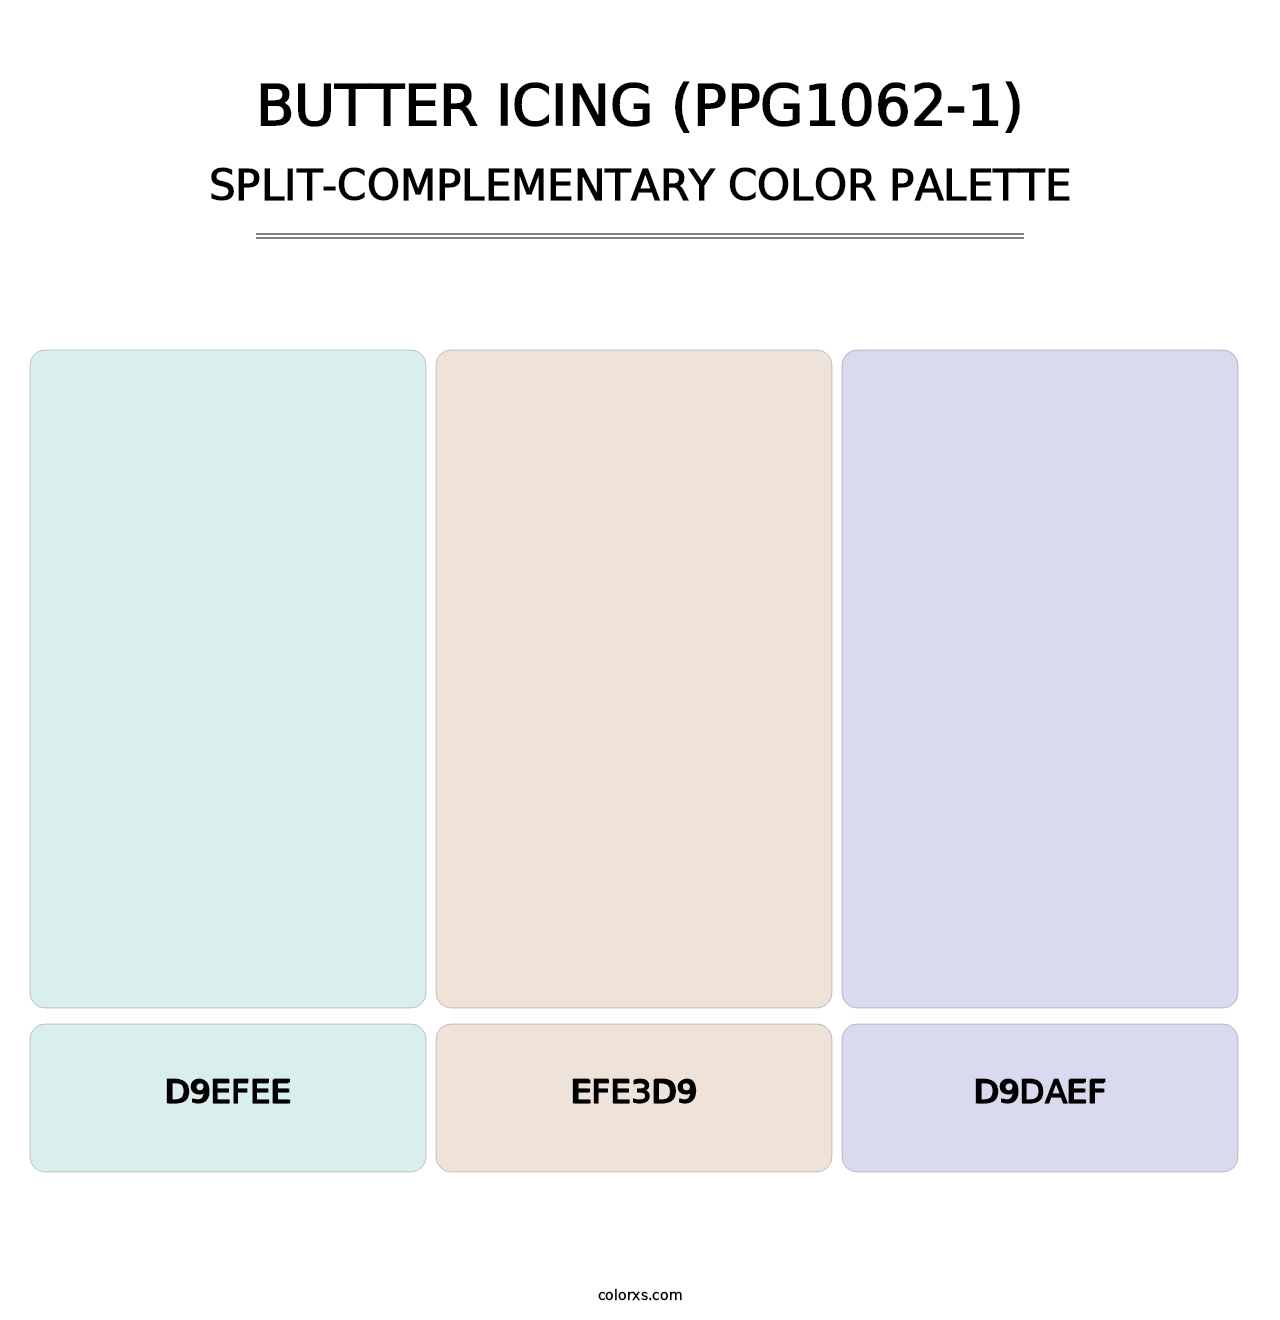 Butter Icing (PPG1062-1) - Split-Complementary Color Palette